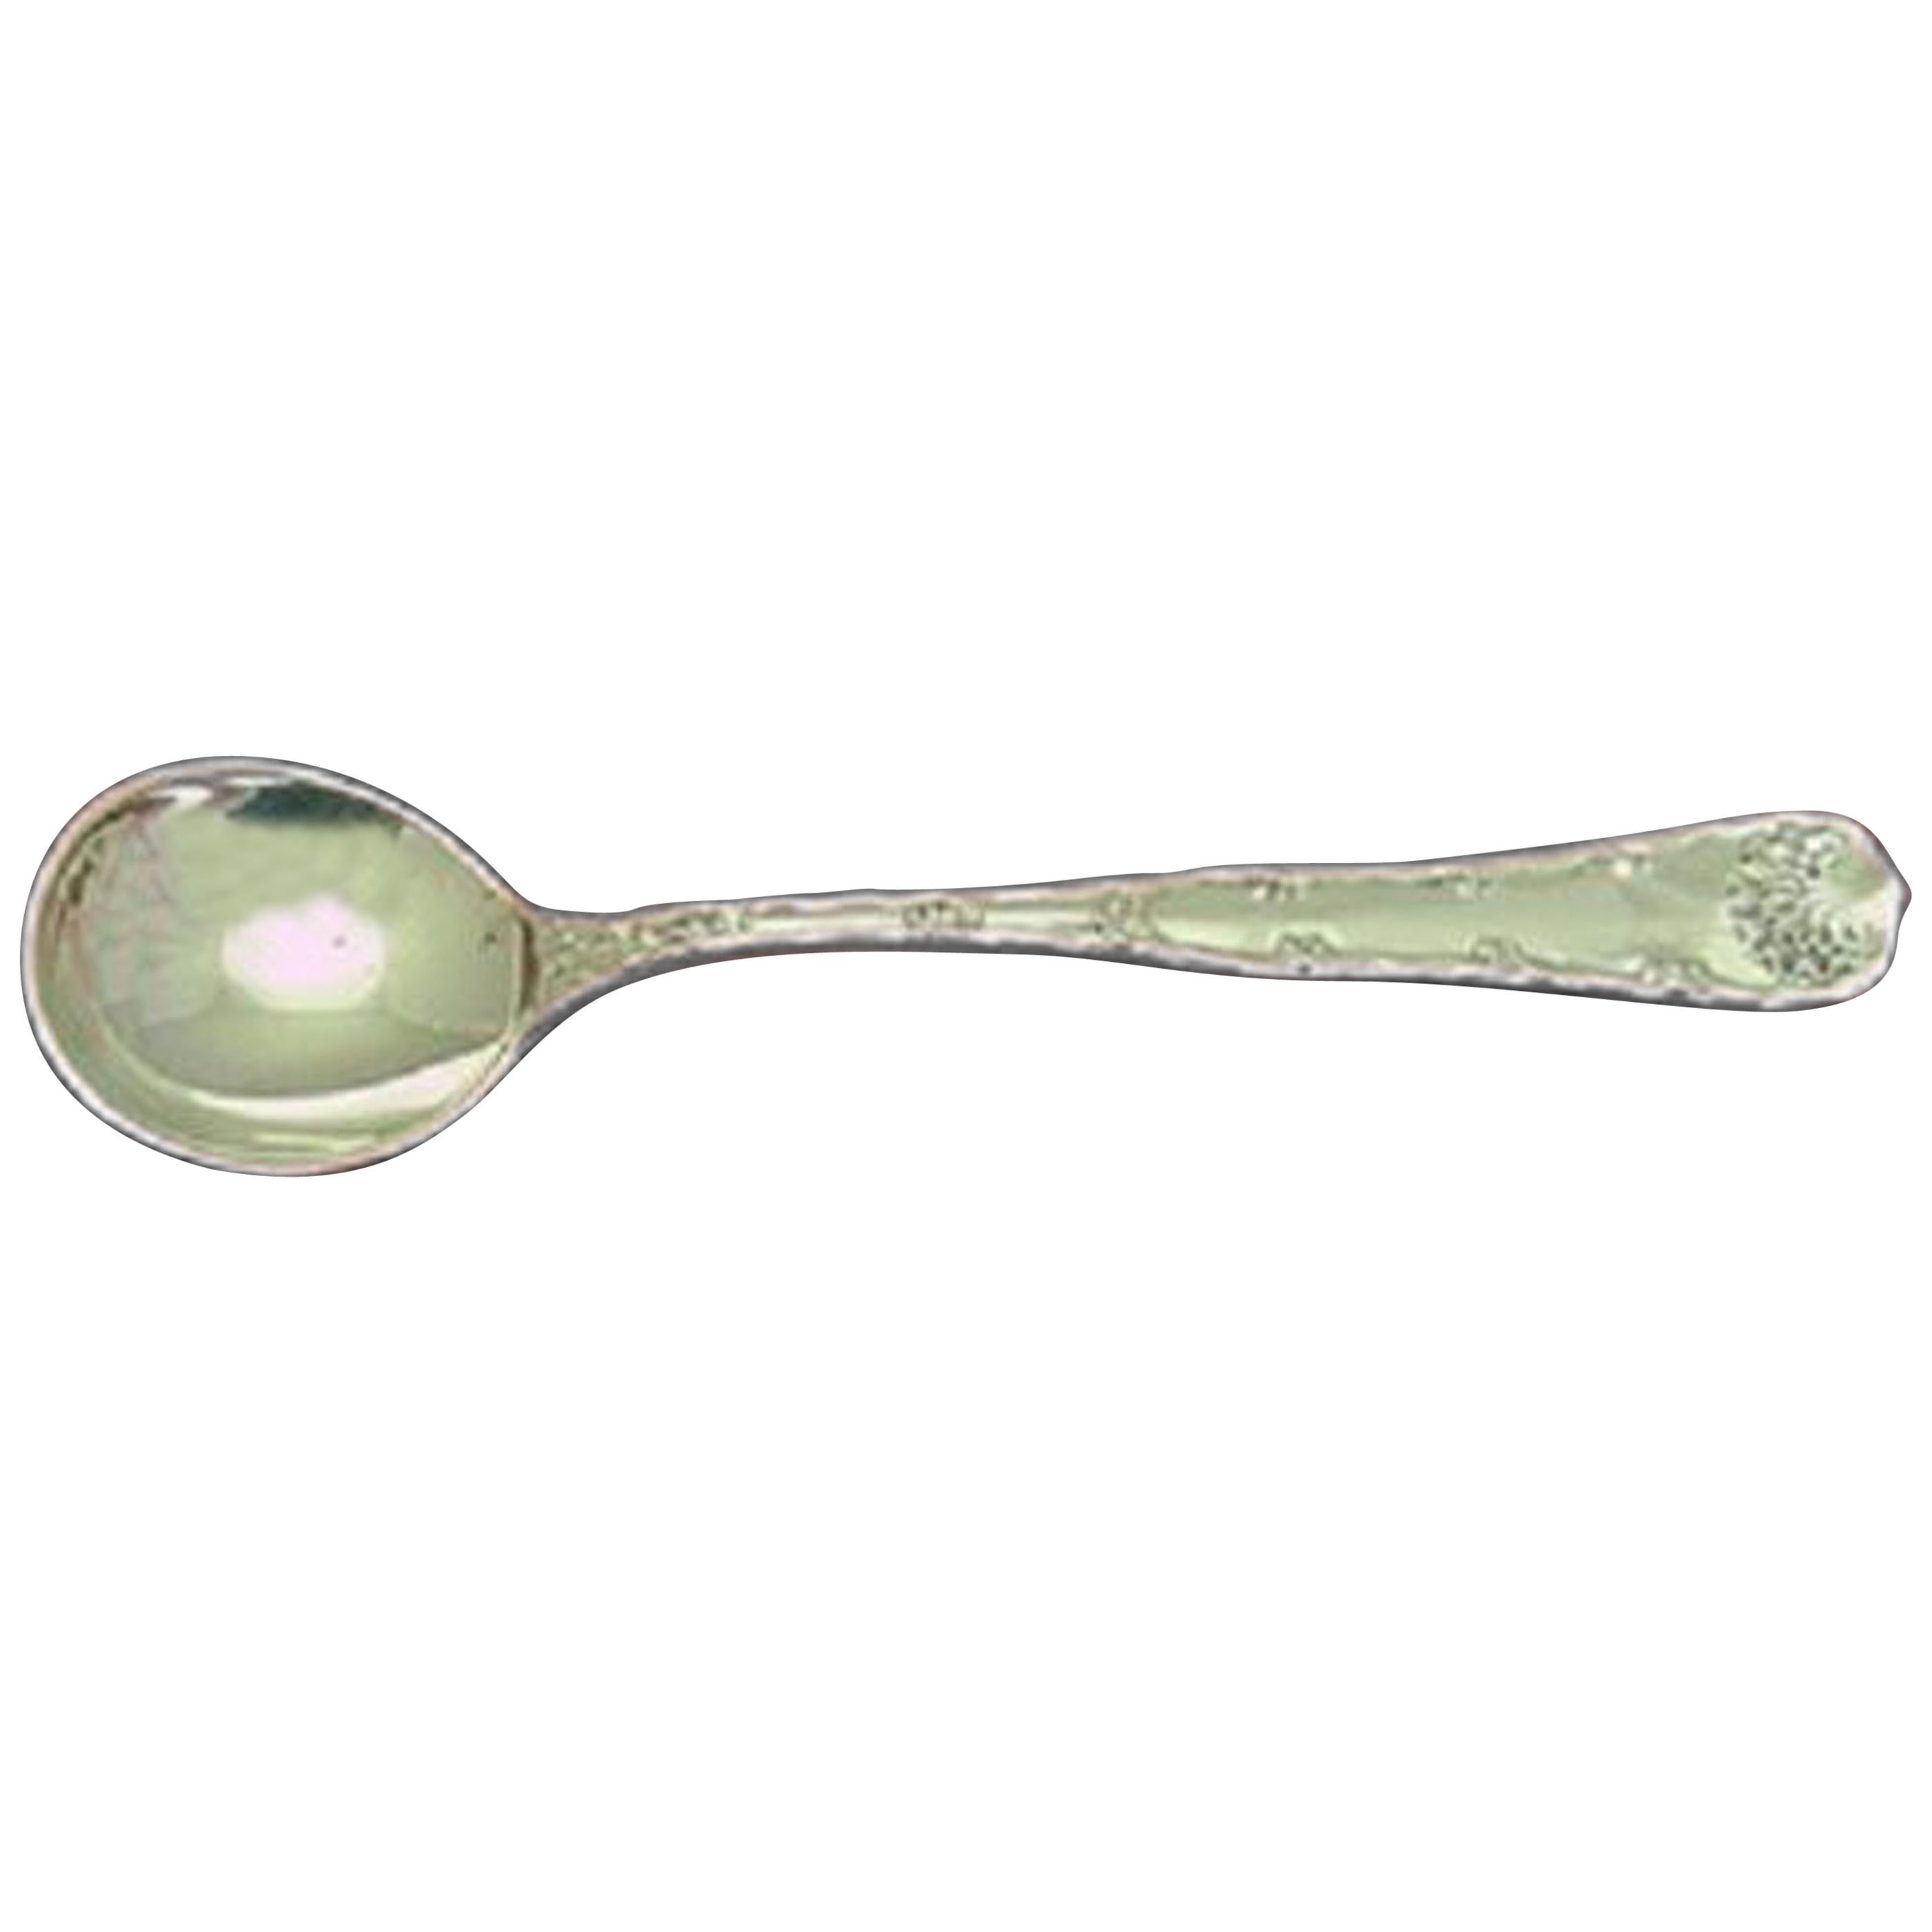 Wave Edge By Tiffany and Co. Sterling Silver Chocolate Spoon Long 5 1/4"